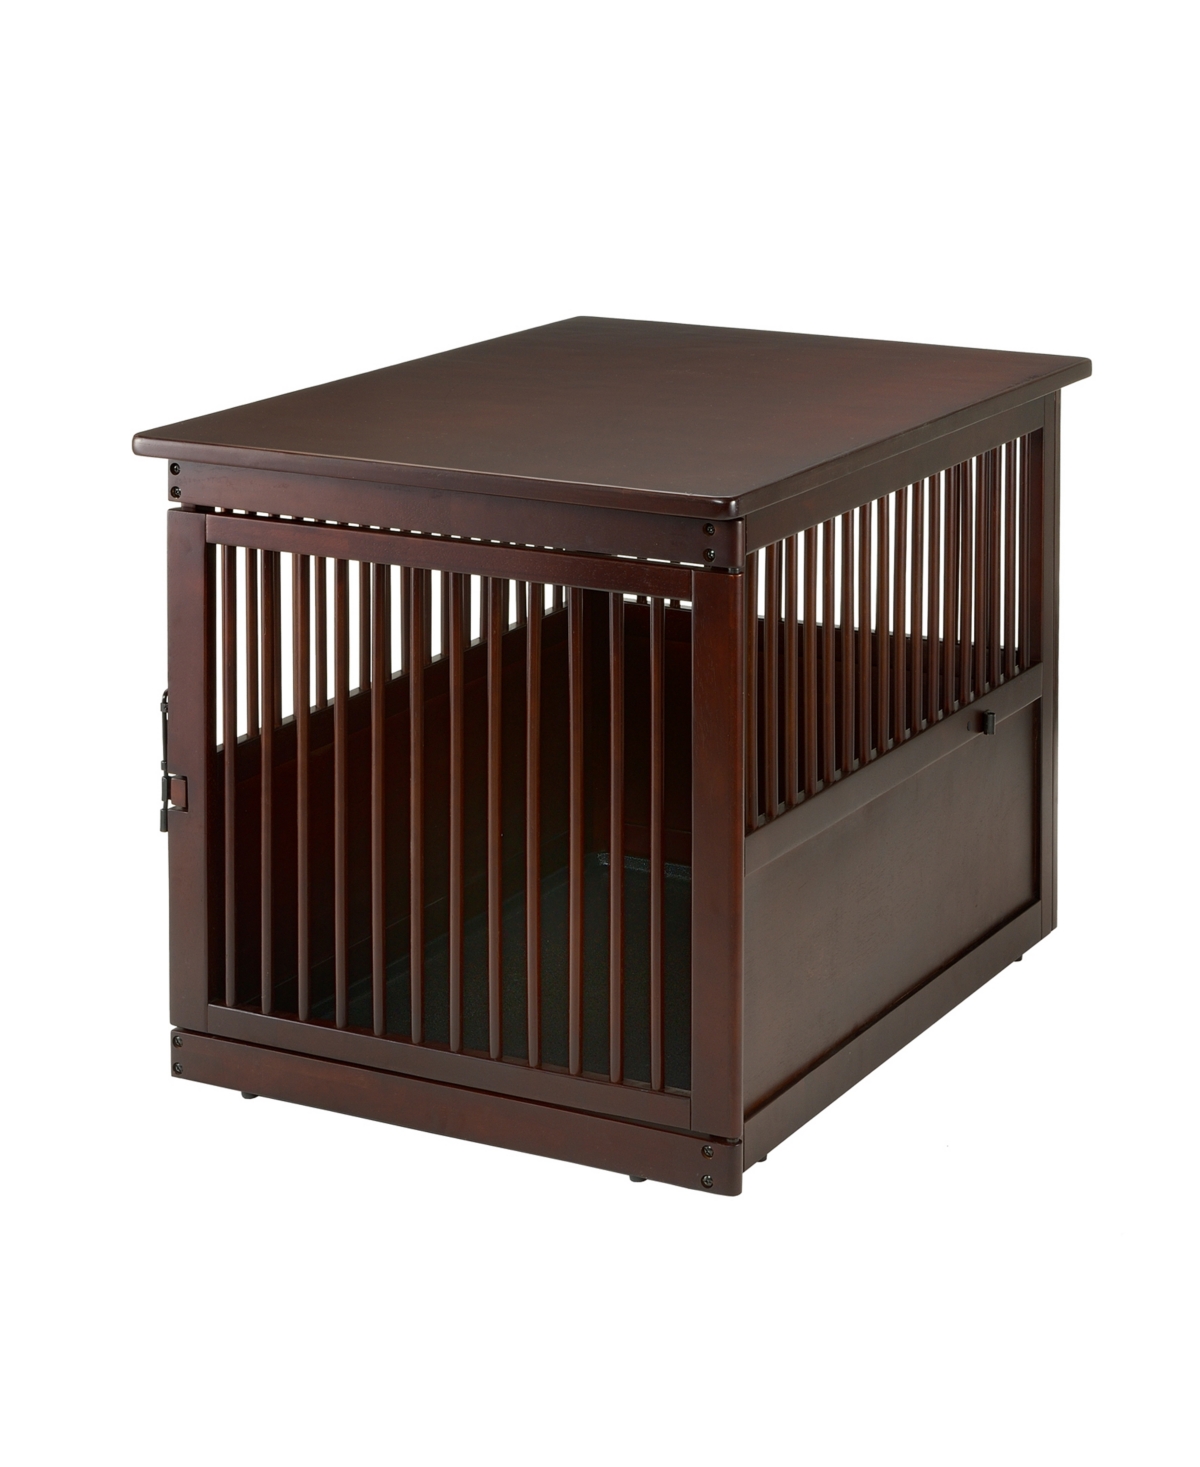 Wooden End Table Crate - Large - Dark Brown